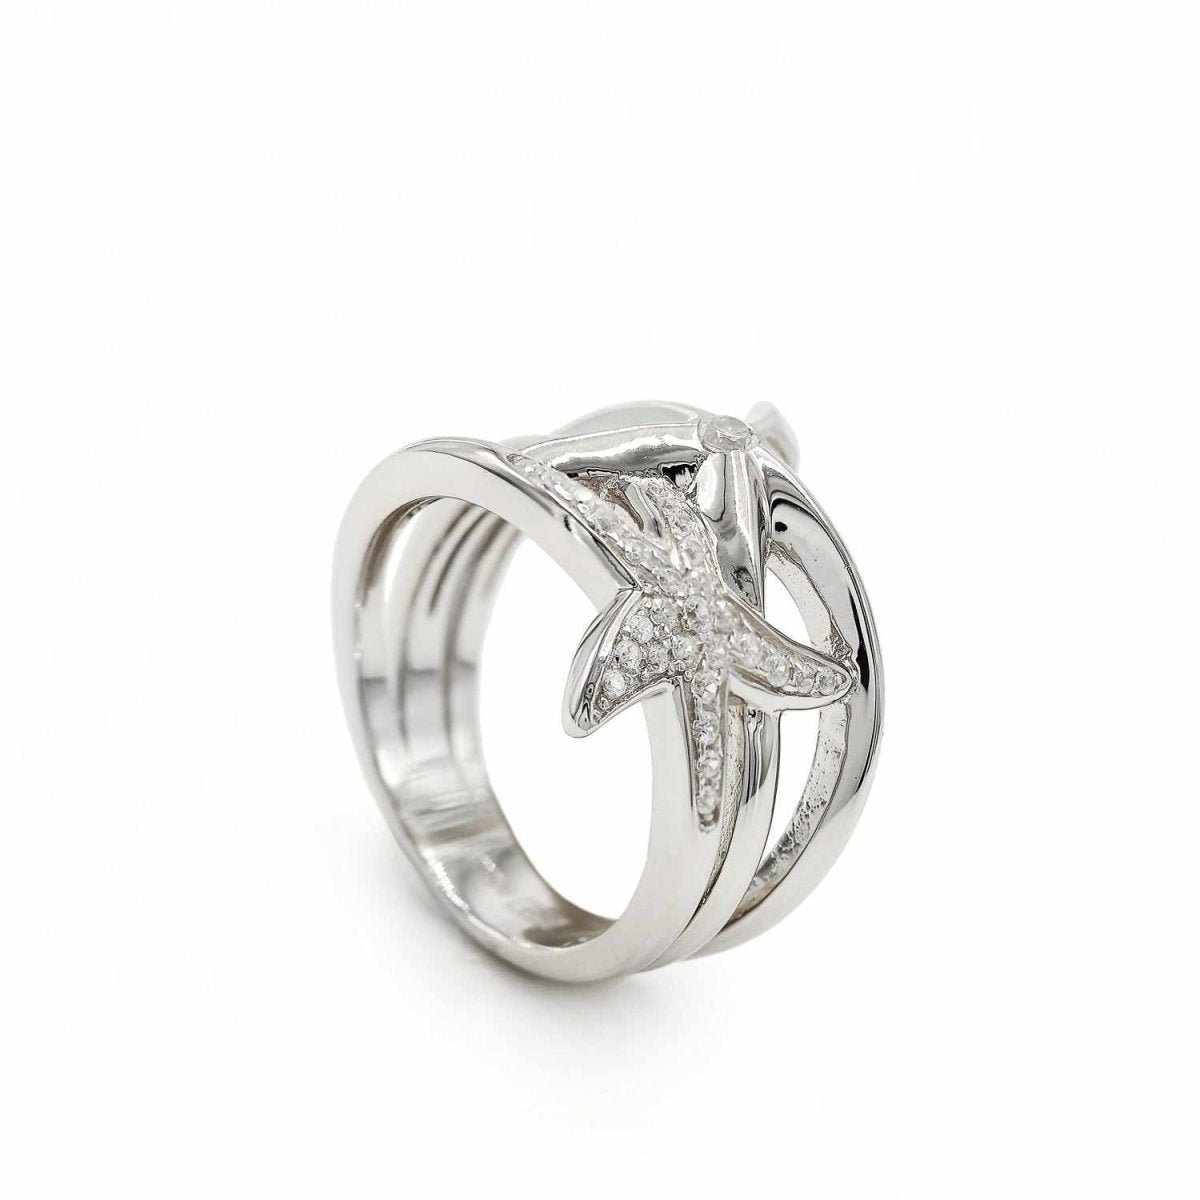 Ring - Big rings in silver double star motive